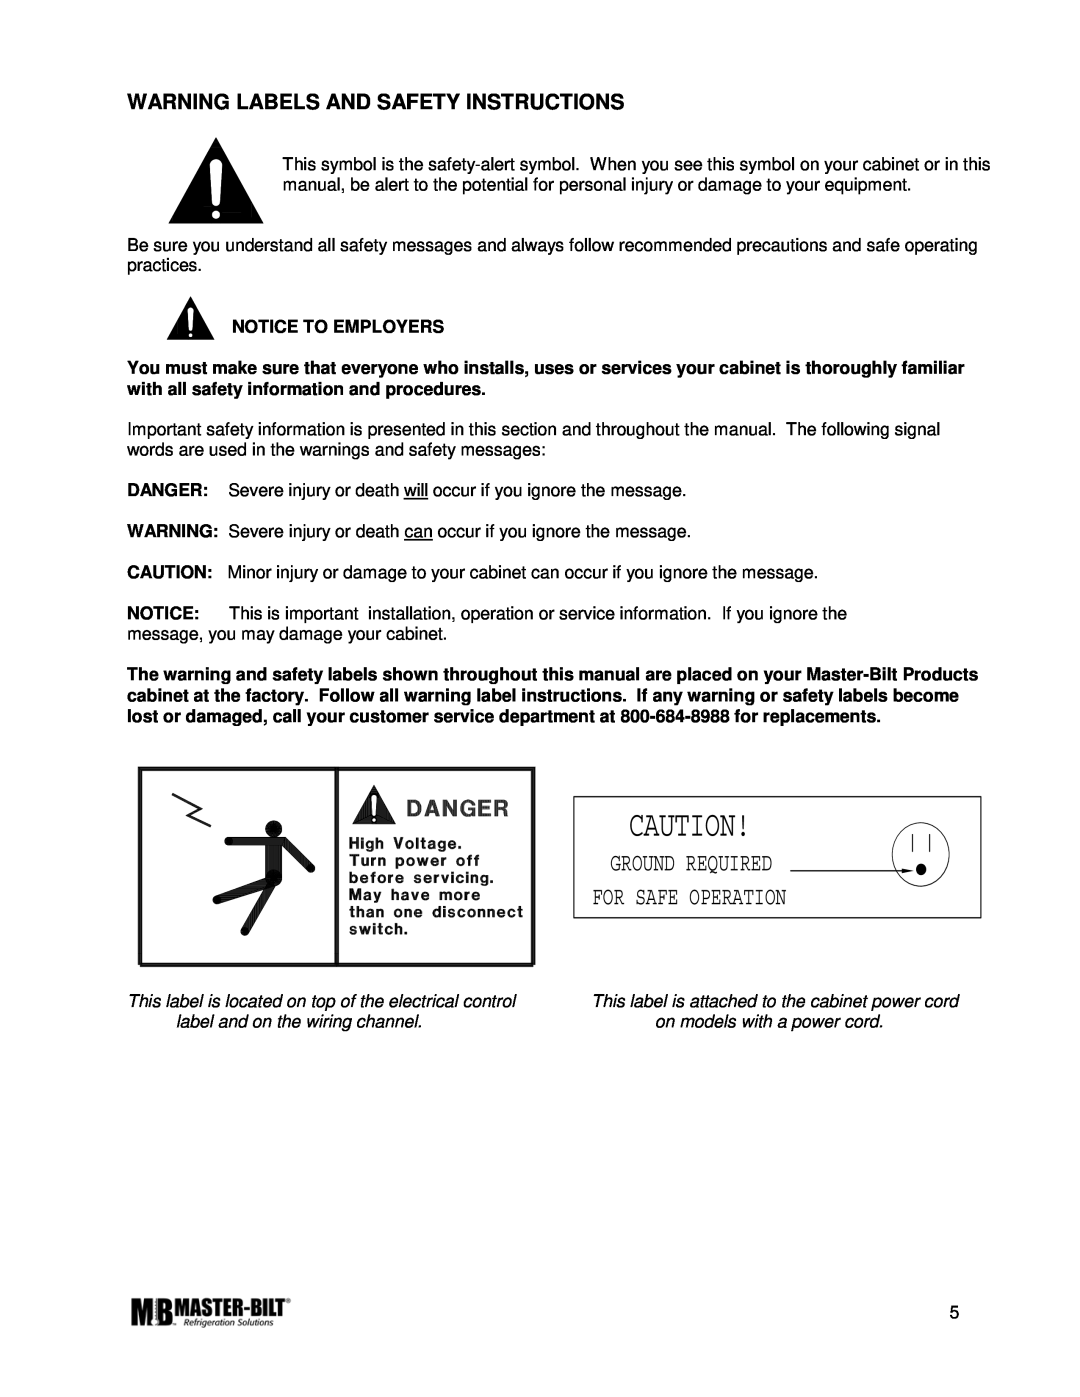 Master Bilt K manual Warning Labels And Safety Instructions, Ground Required For Safe Operation 